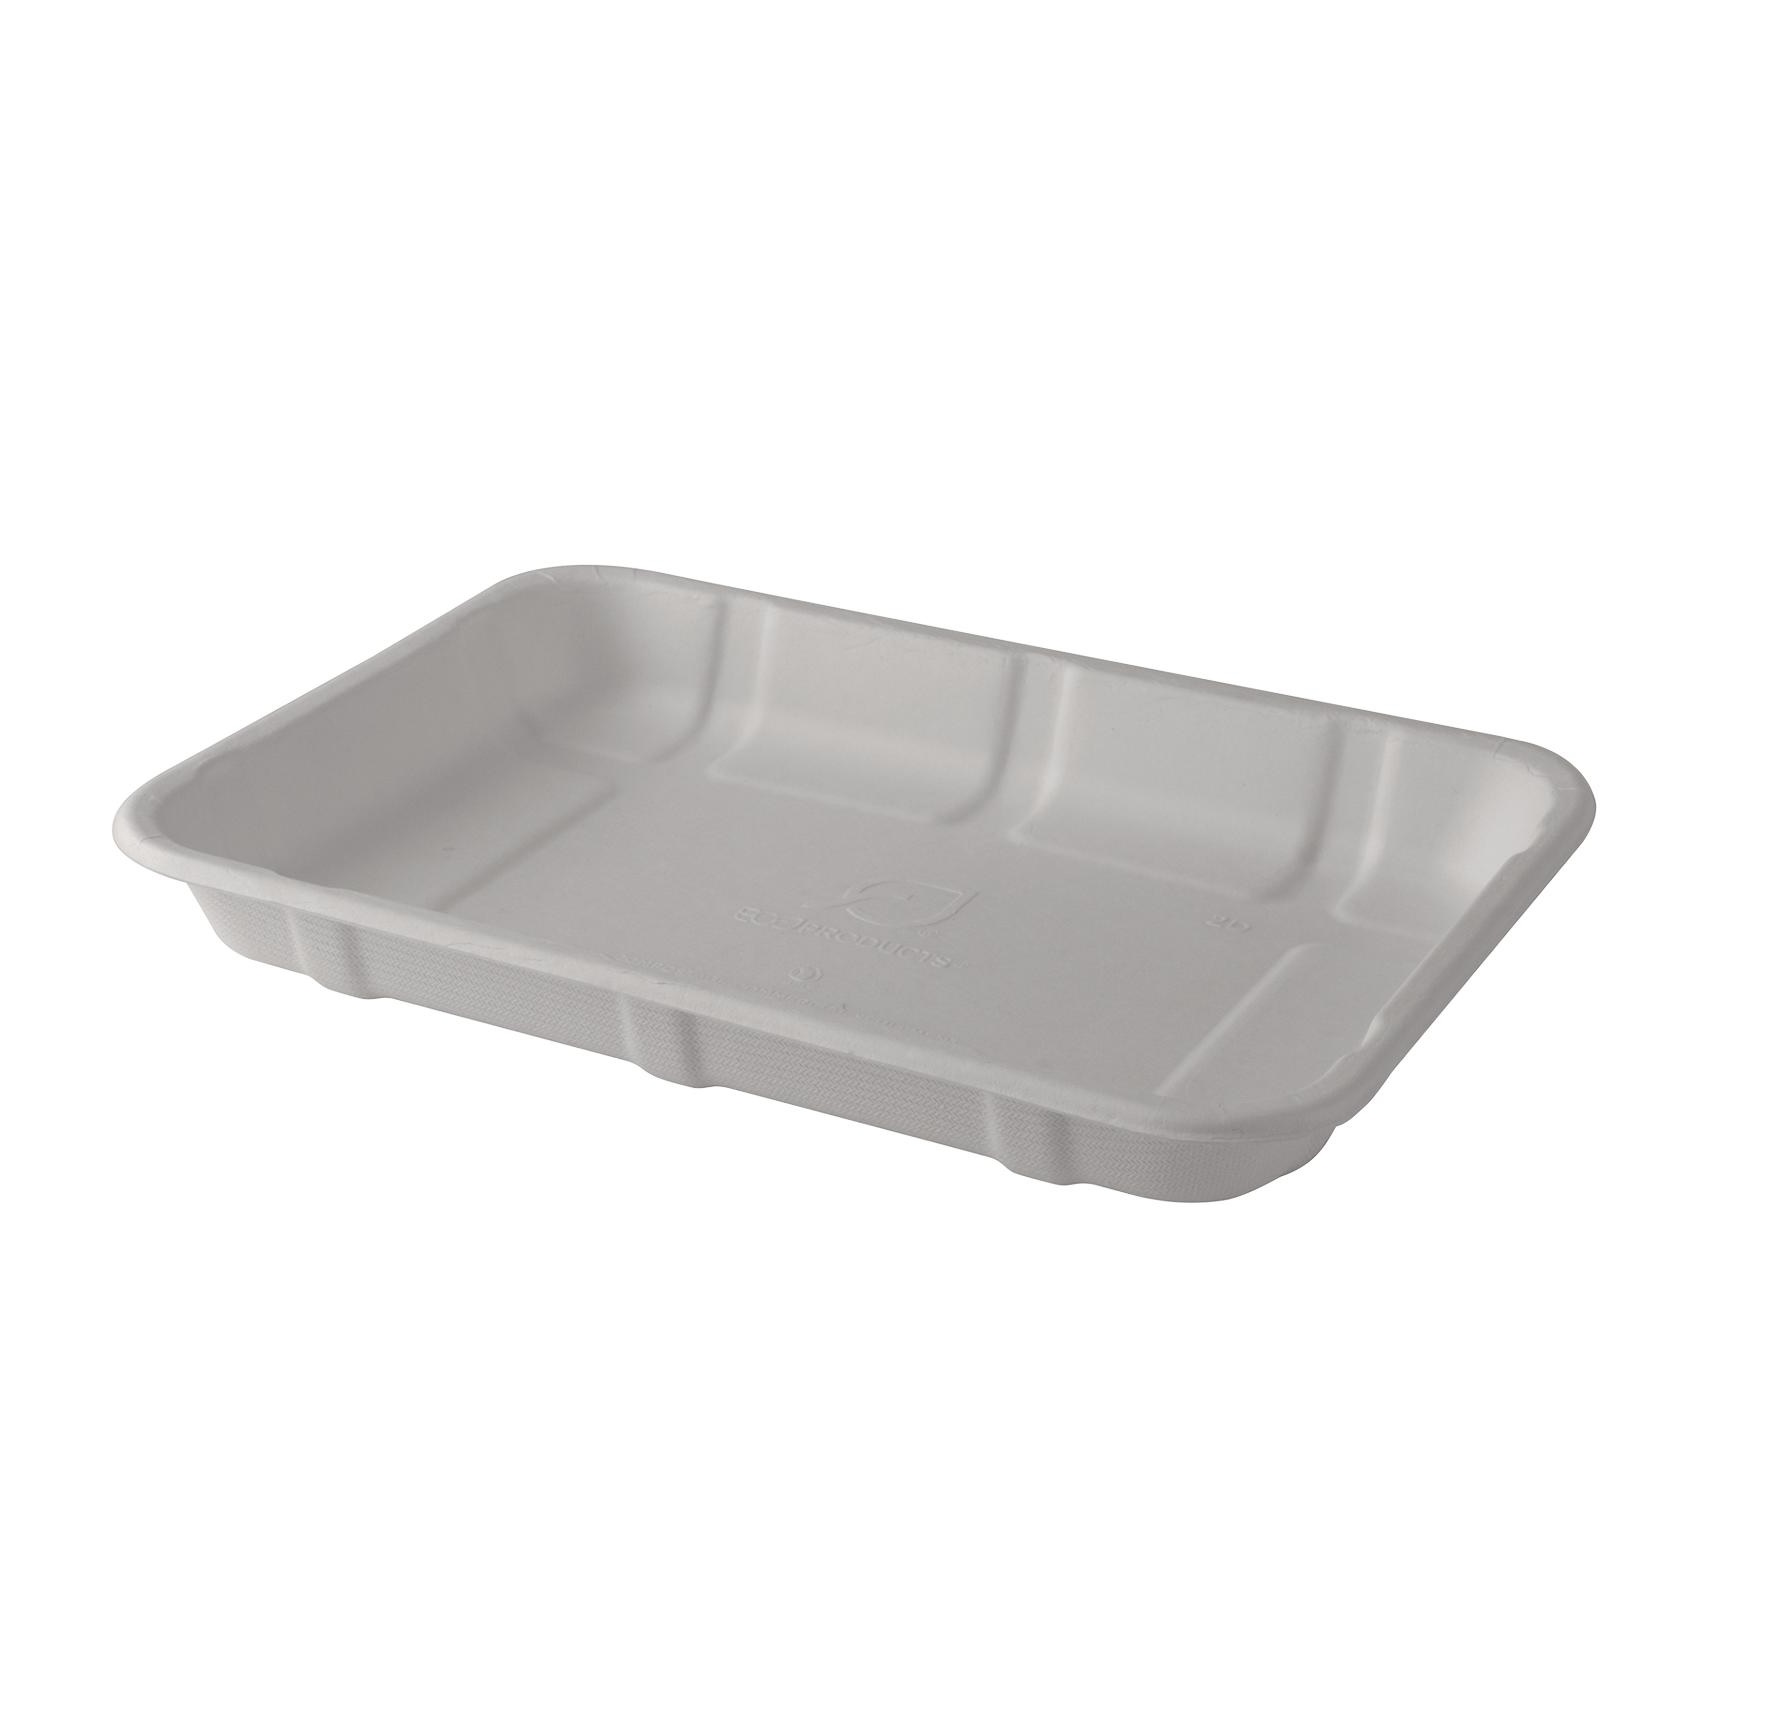 Suppliers Of Bagasse Sugarcane Food Trays PREMIUM Approx D3 Per 400 For The Foods Industry